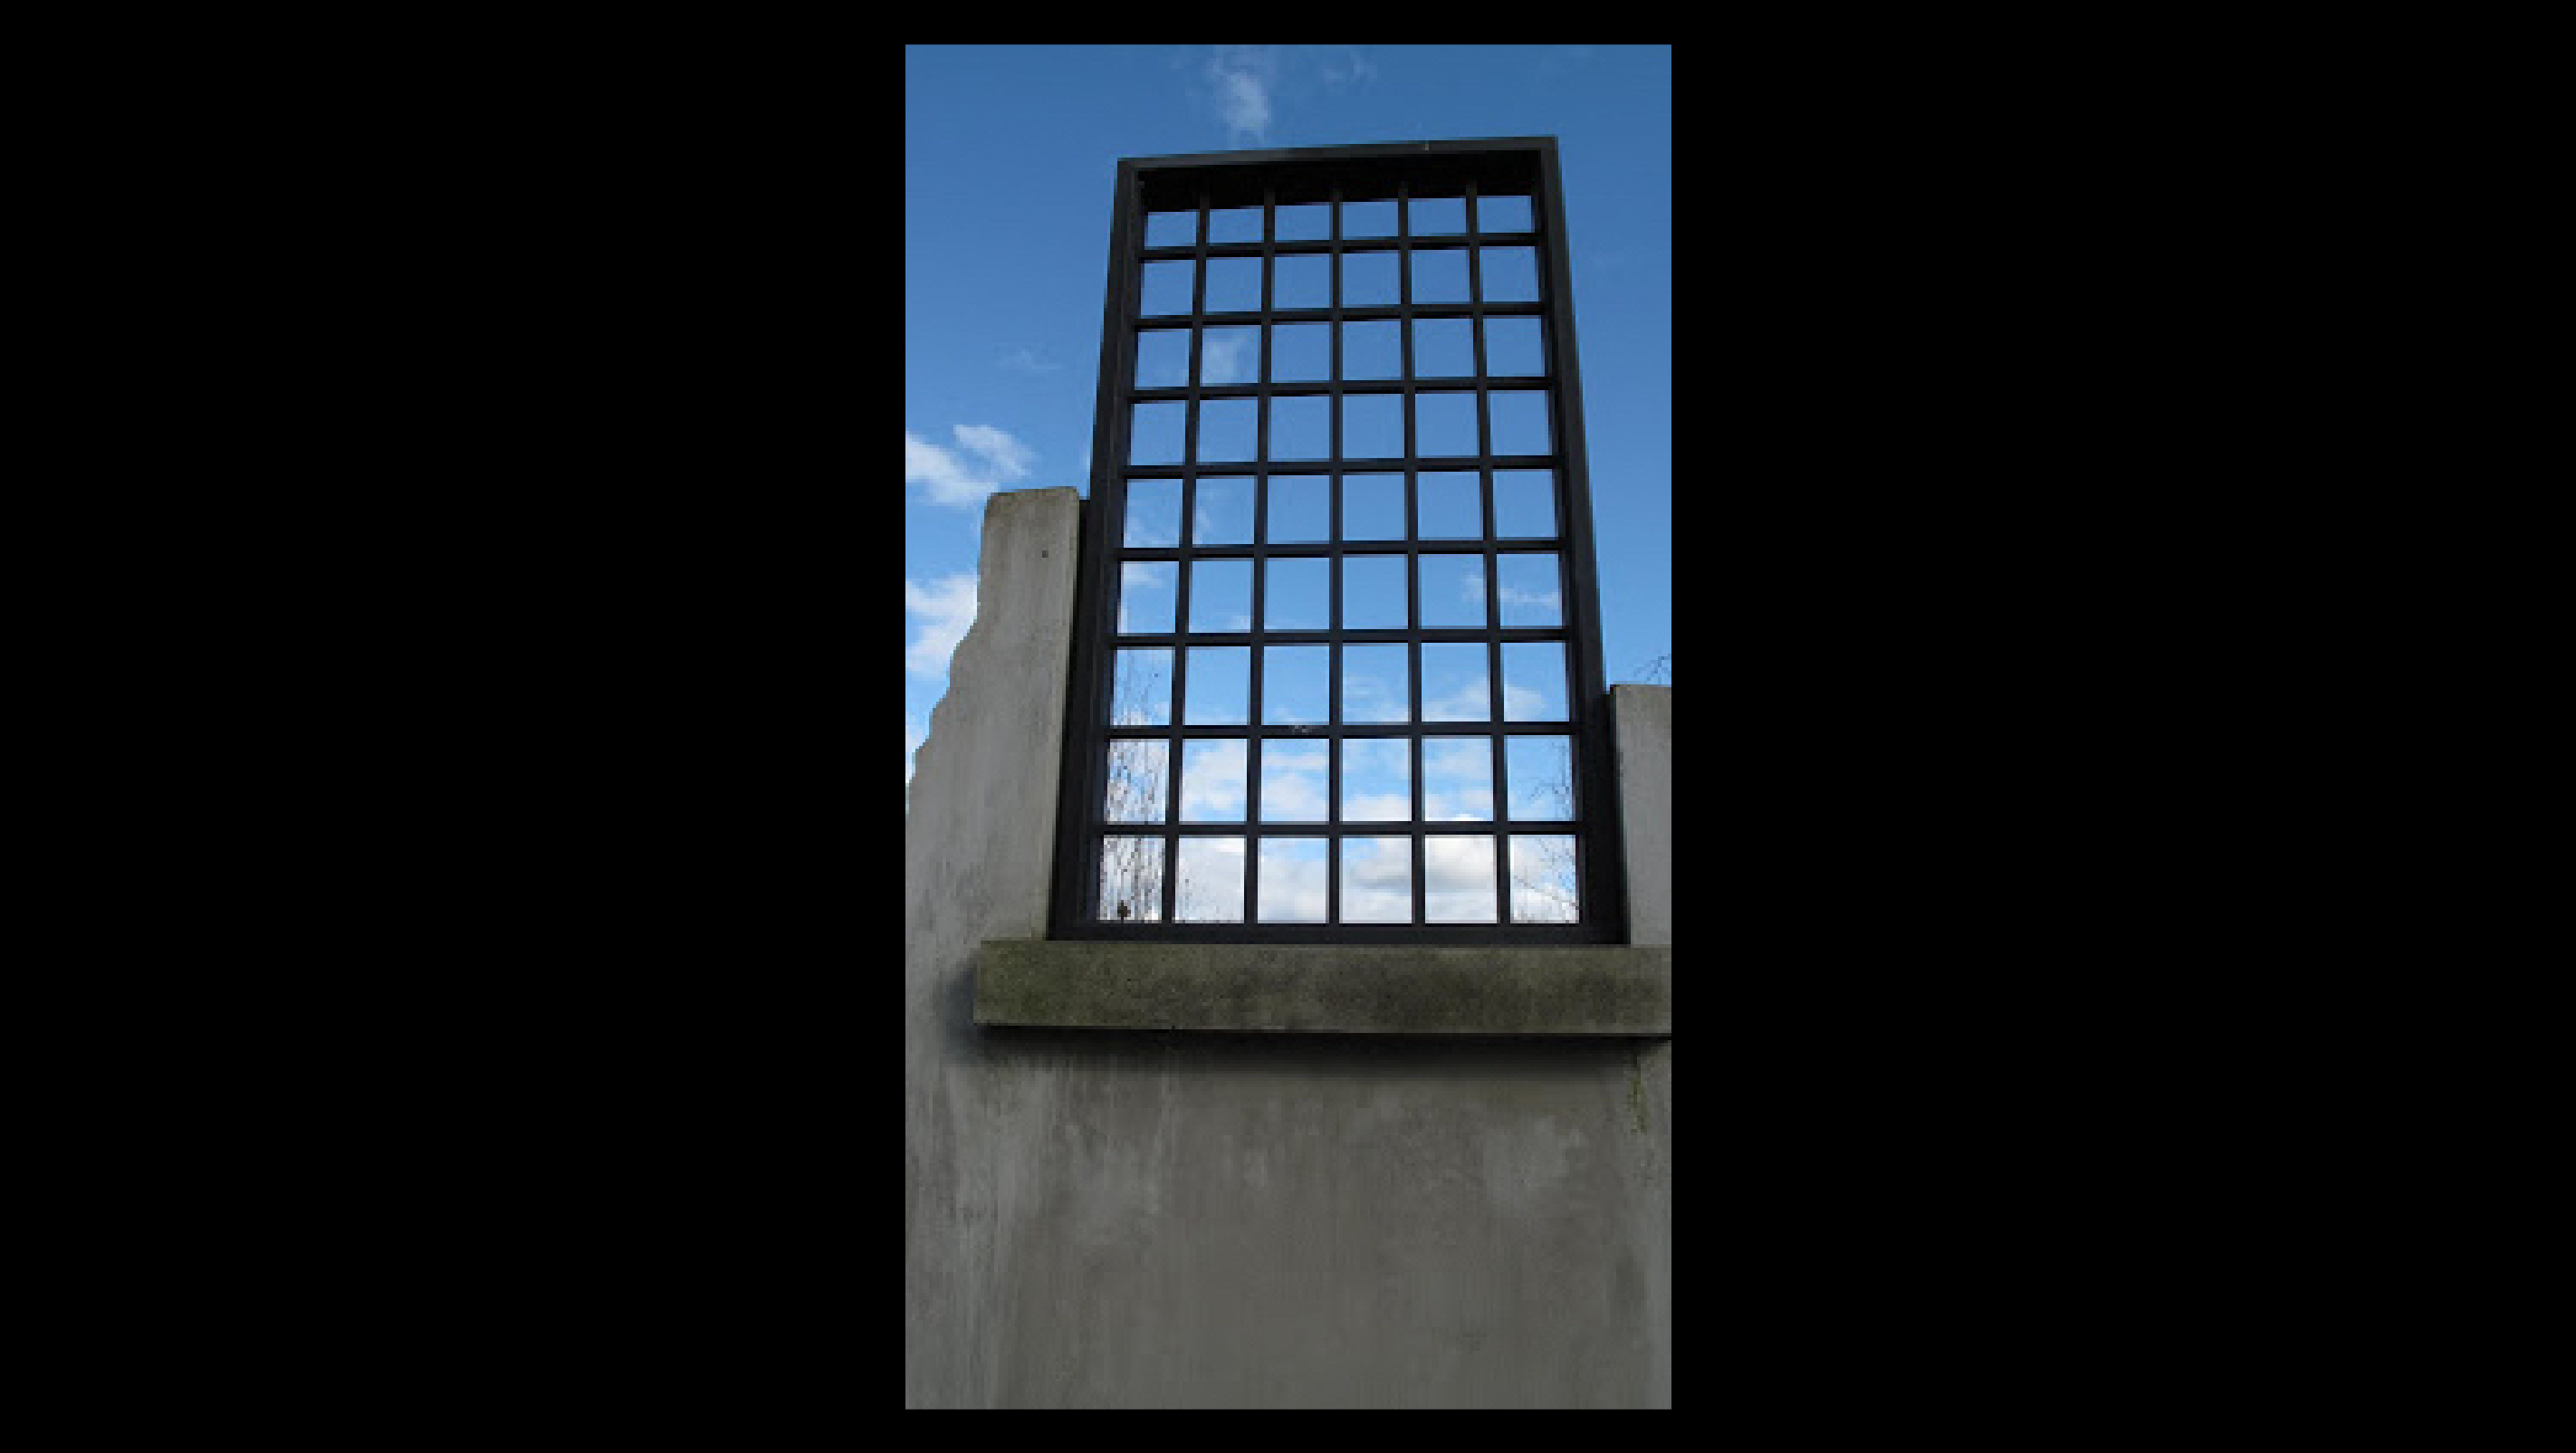 A large window with bars stands on top of a concrete wall.